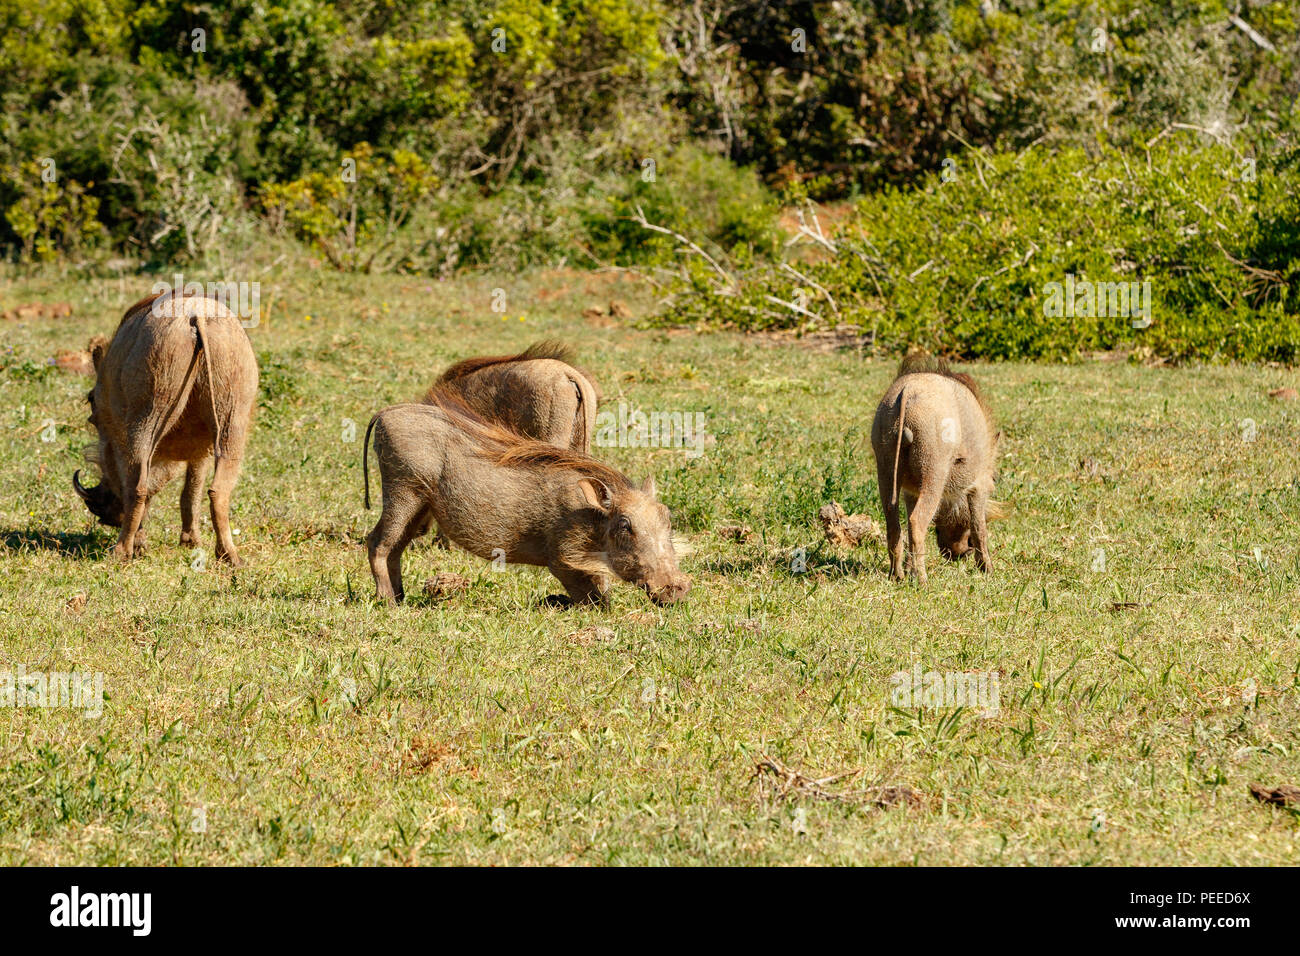 Warthogs gathering together in a circle to eat grass in the field Stock Photo